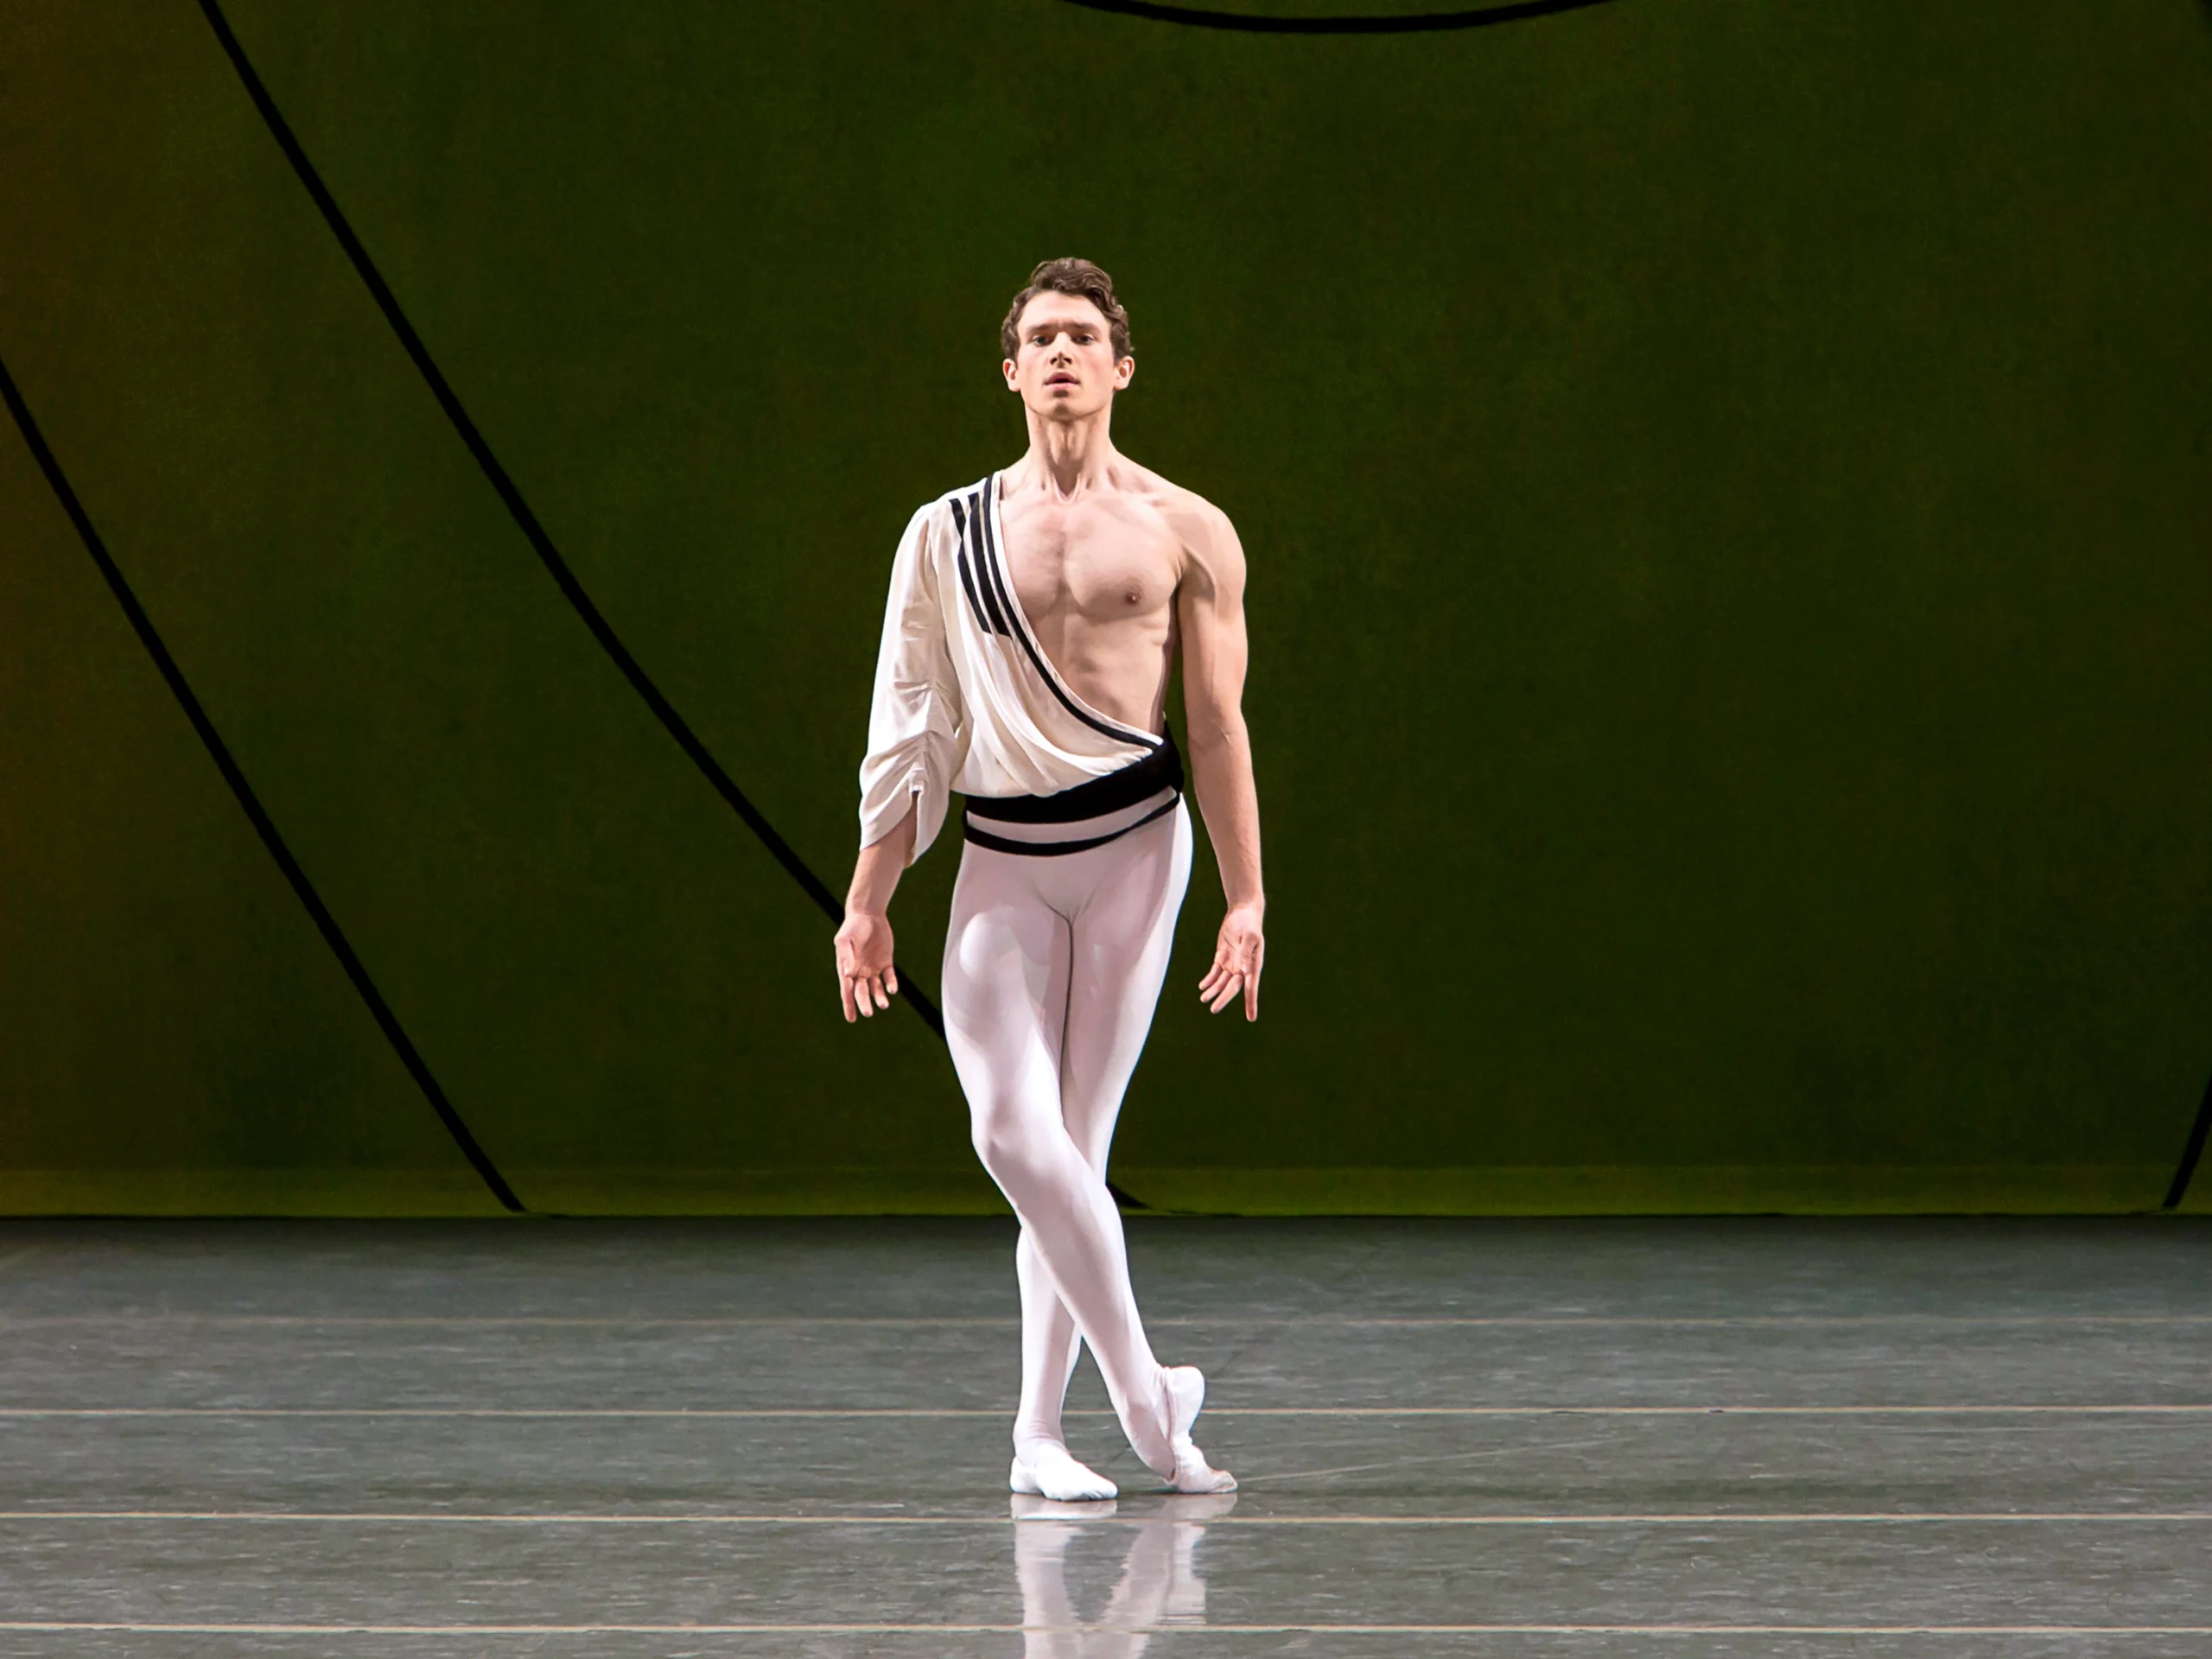 During a performance, Cameron McCune stands onstage with his pointed right foot crossed over his left and his arms held down, palms open towards the audience. He wears white tights and ballet slippers and a white toga-like shirt with one sleeve. McCune looks straight ahead towards the audience.